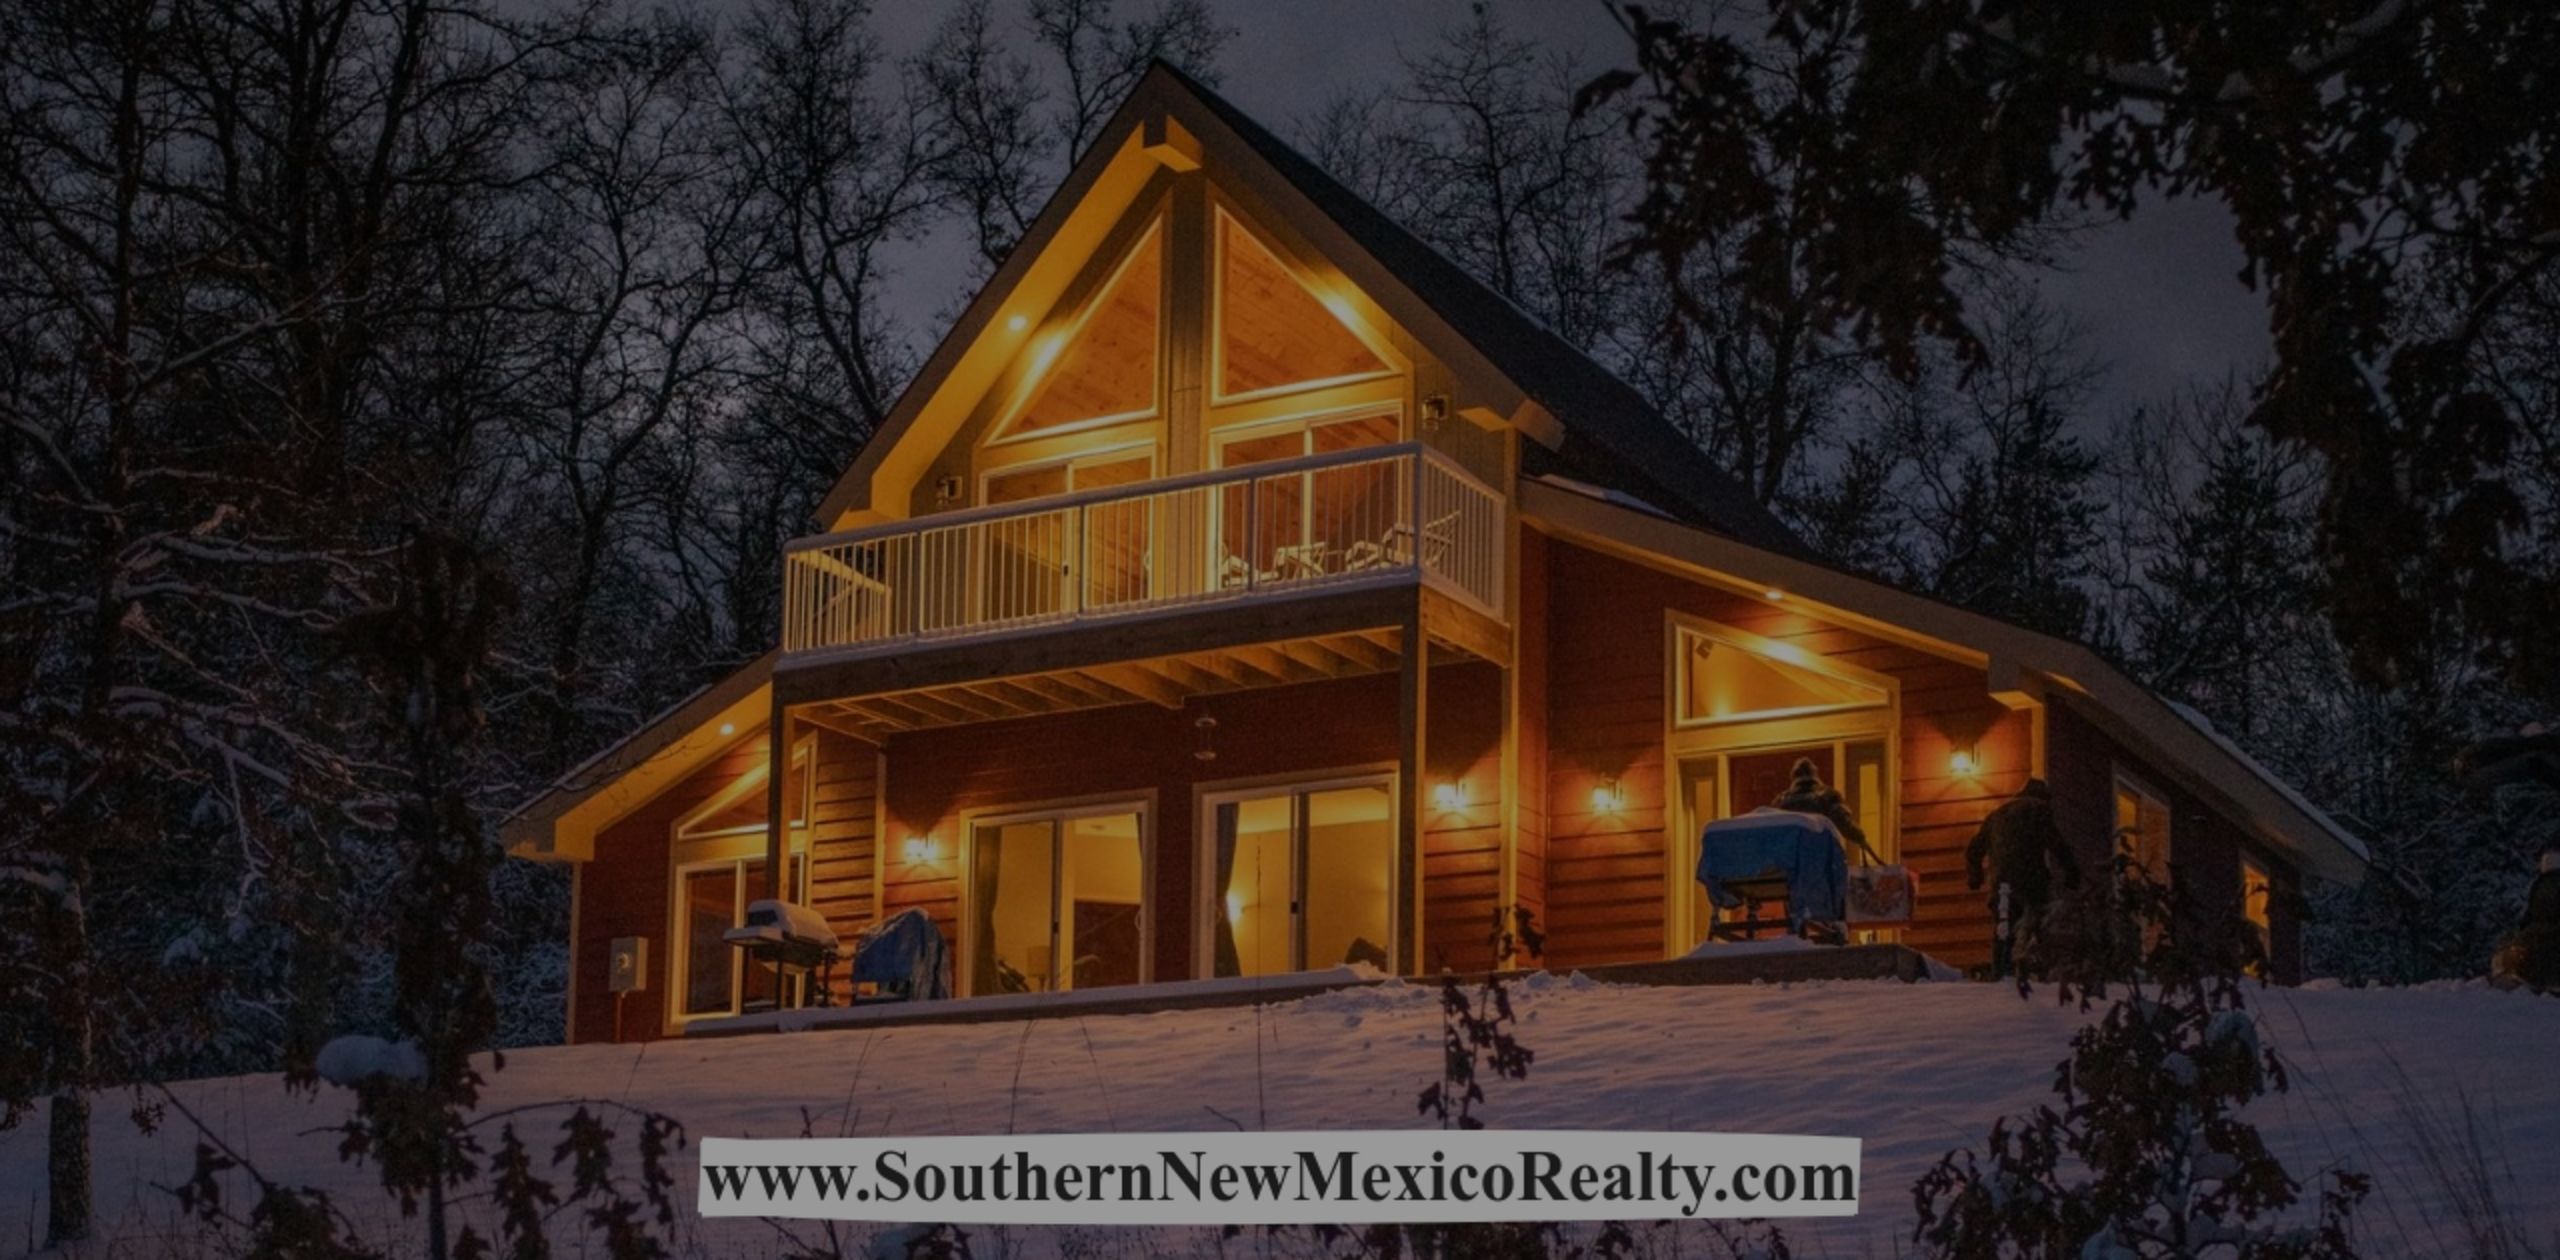 7 Steps To Finding The Perfect New Home In Ruidoso